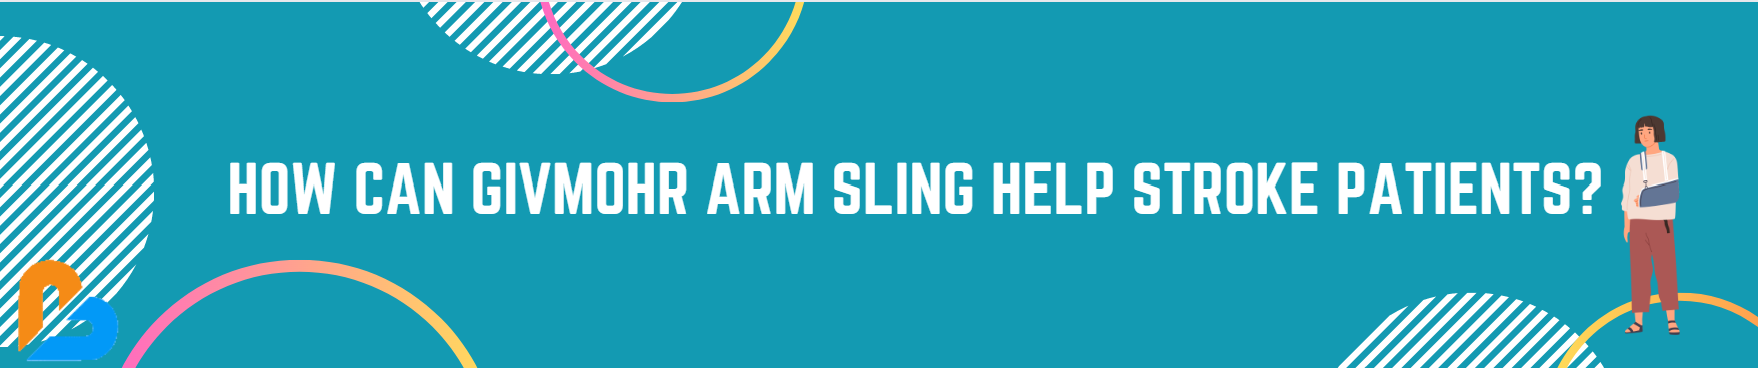 How Can GivMohr Arm Sling Help Stroke Patients?